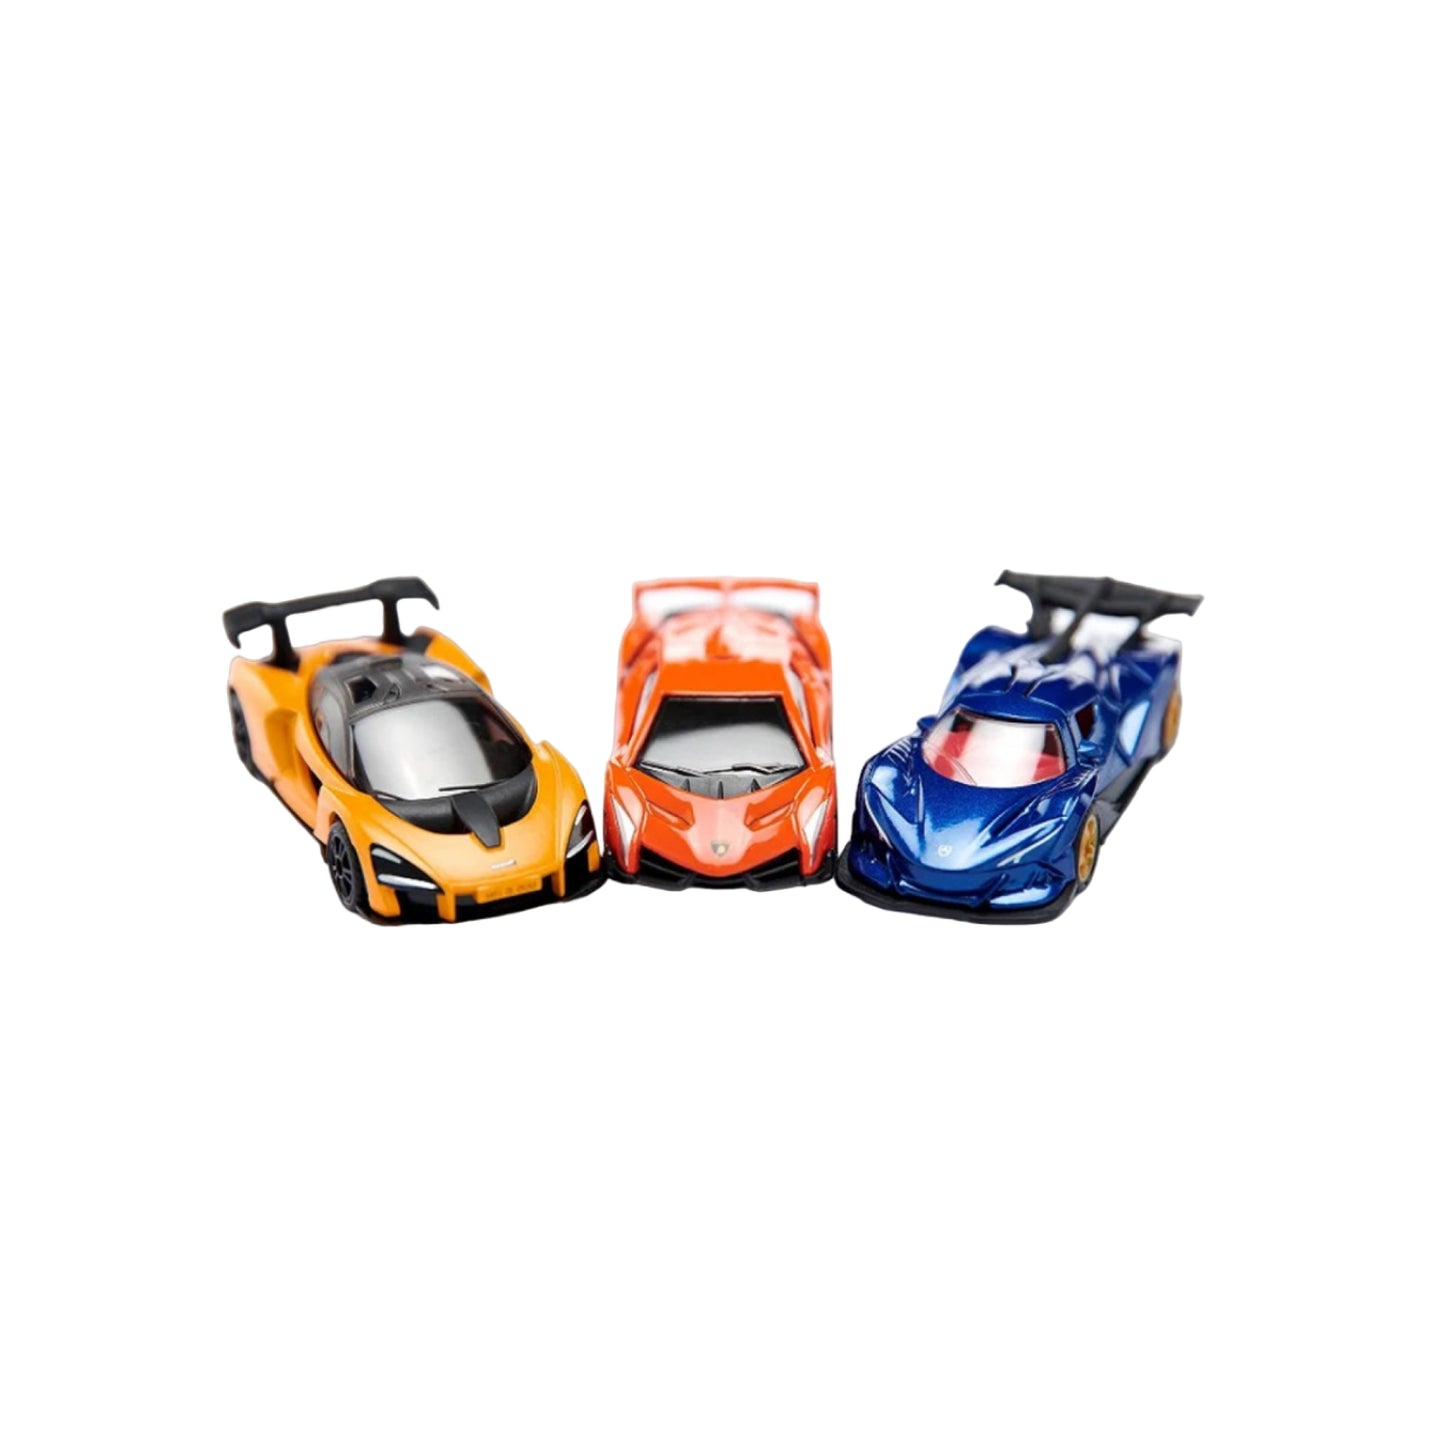 Gift Set Model of 3 Super Racing Cars and Accessories SIKU 6328